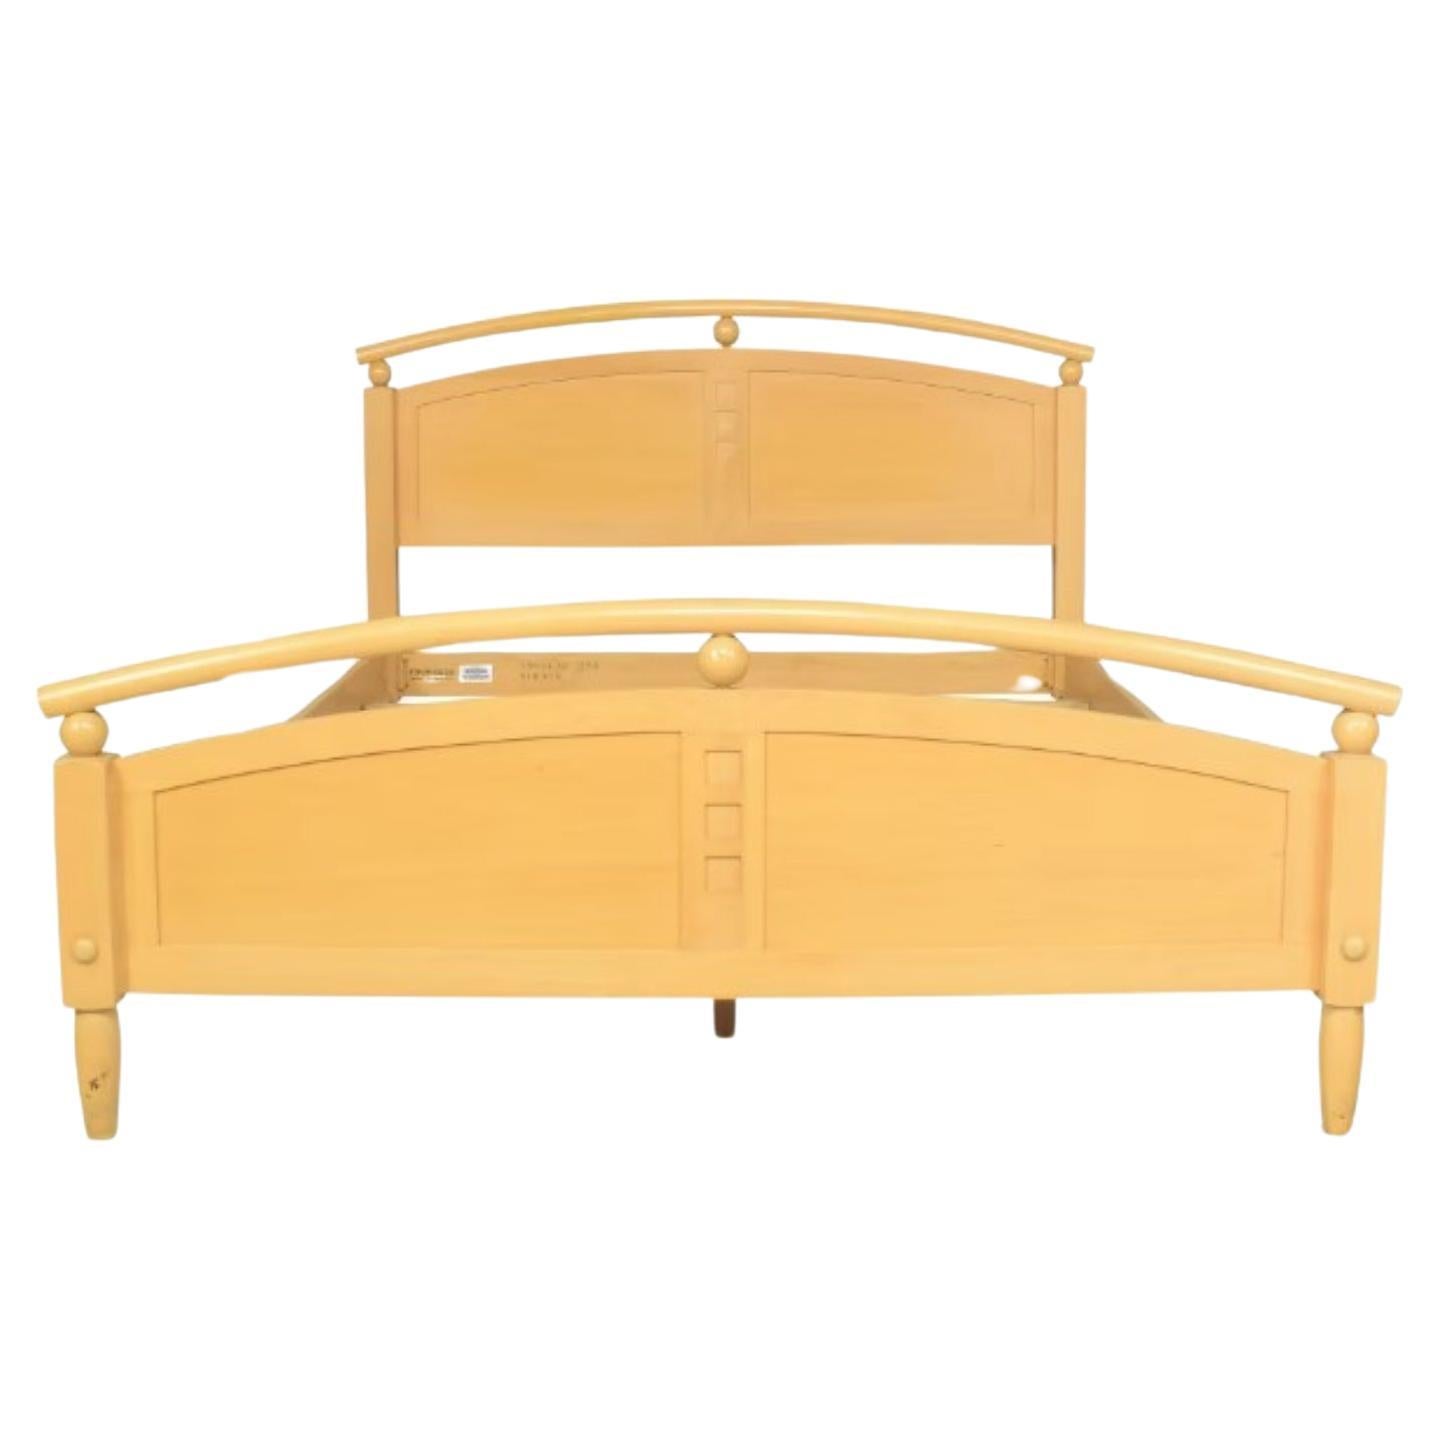 Late 20th Century American Solid Birch Arch Full Size Bedstead For Sale